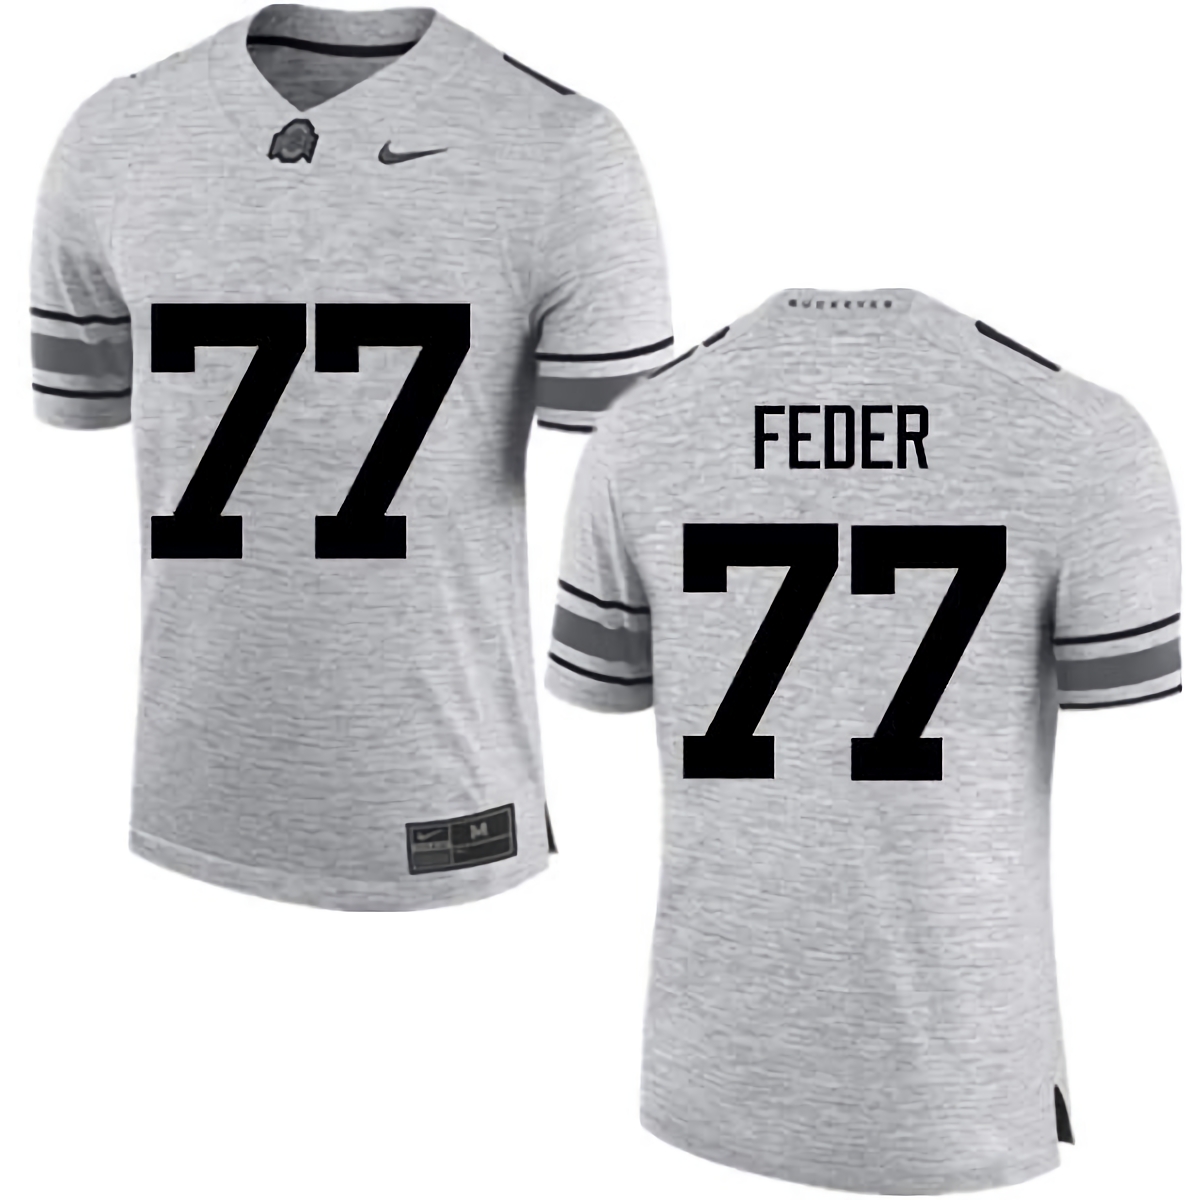 Kevin Feder Ohio State Buckeyes Men's NCAA #77 Nike Gray College Stitched Football Jersey RDV0256OR